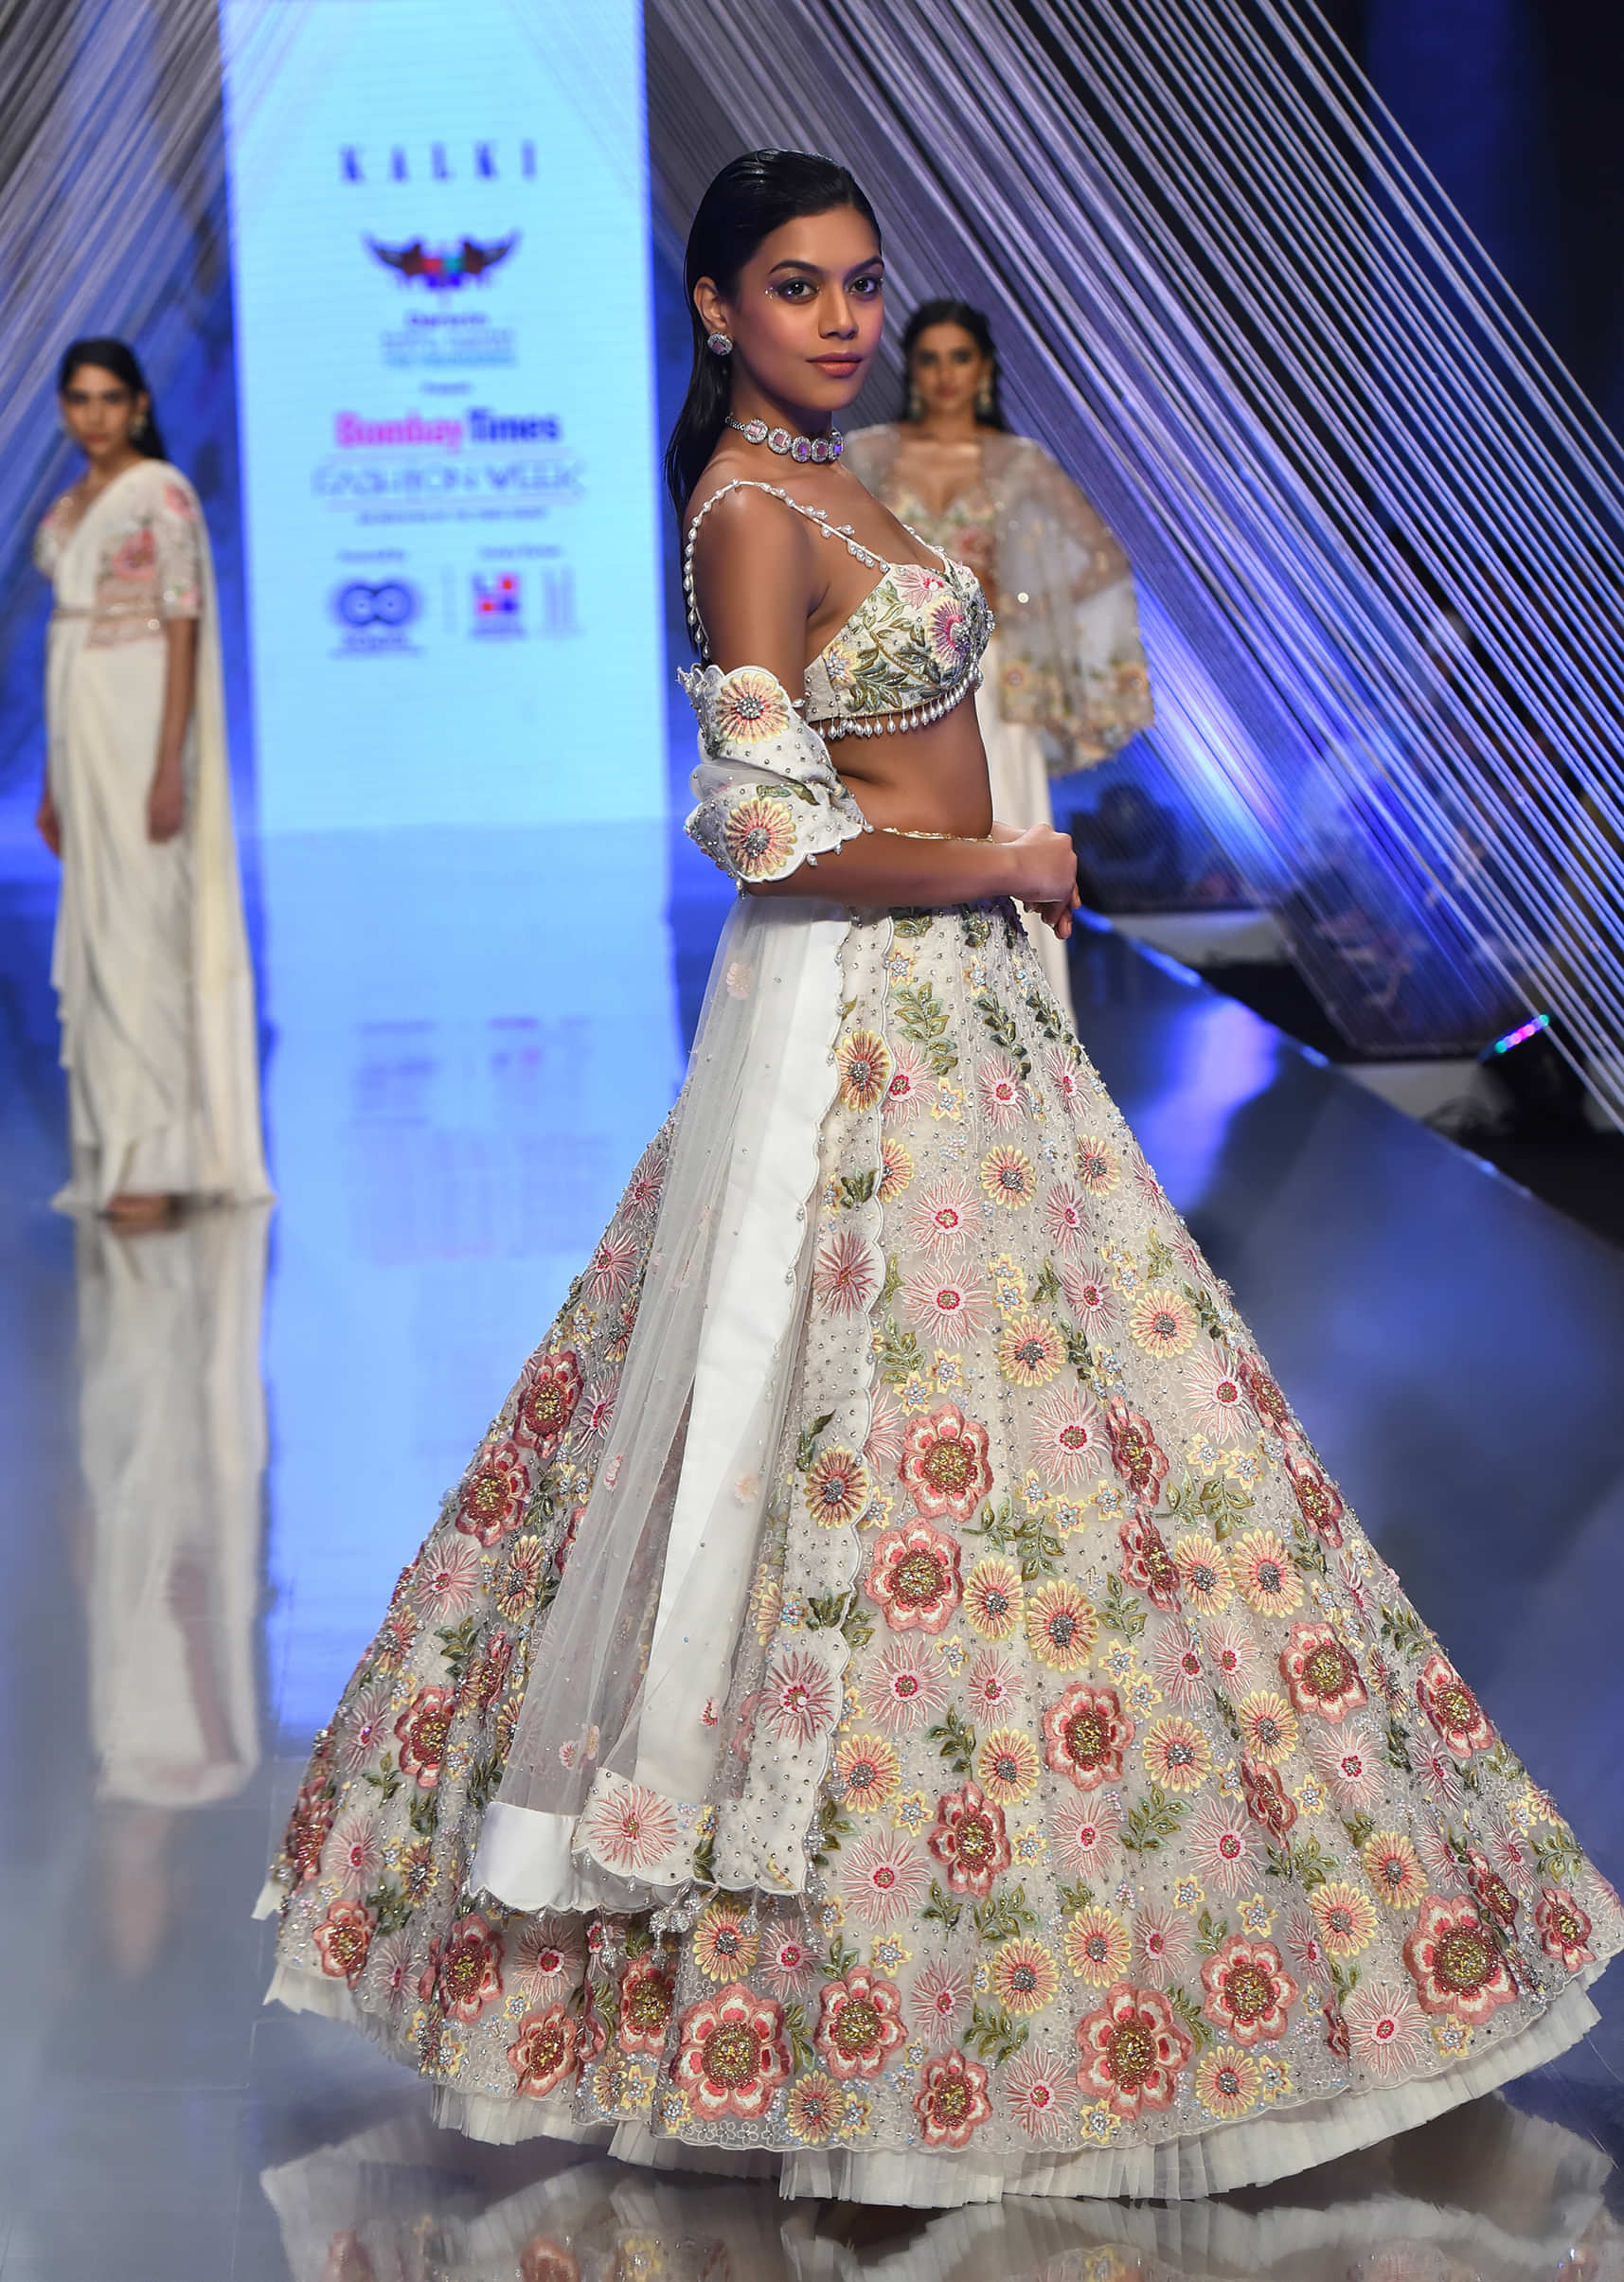 Cream Lehenga With A Crop Top In Moti Embroidery, Crafted In Organza With 3D Flower Motifs Embroidery